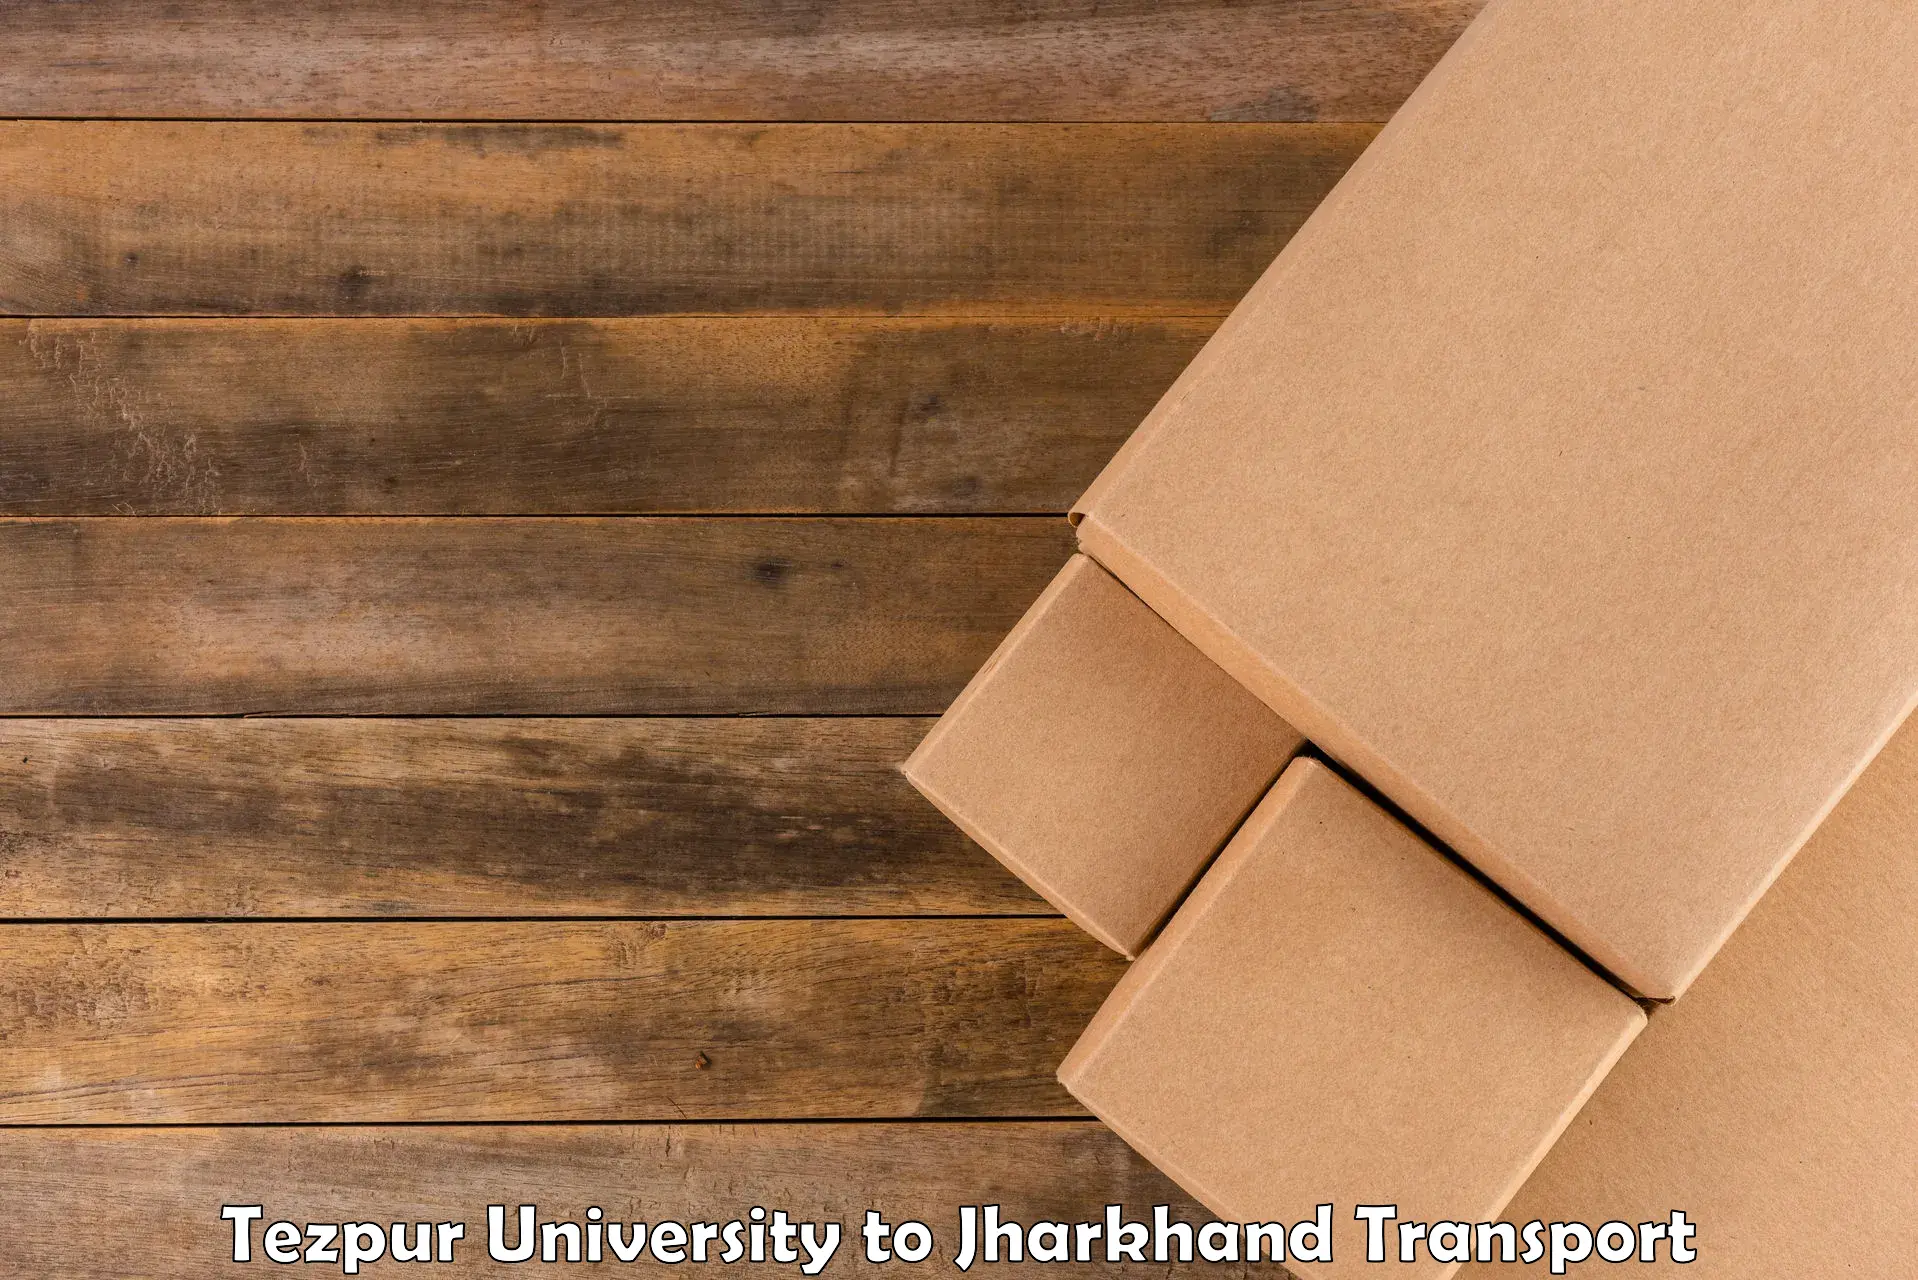 Commercial transport service Tezpur University to Jharkhand